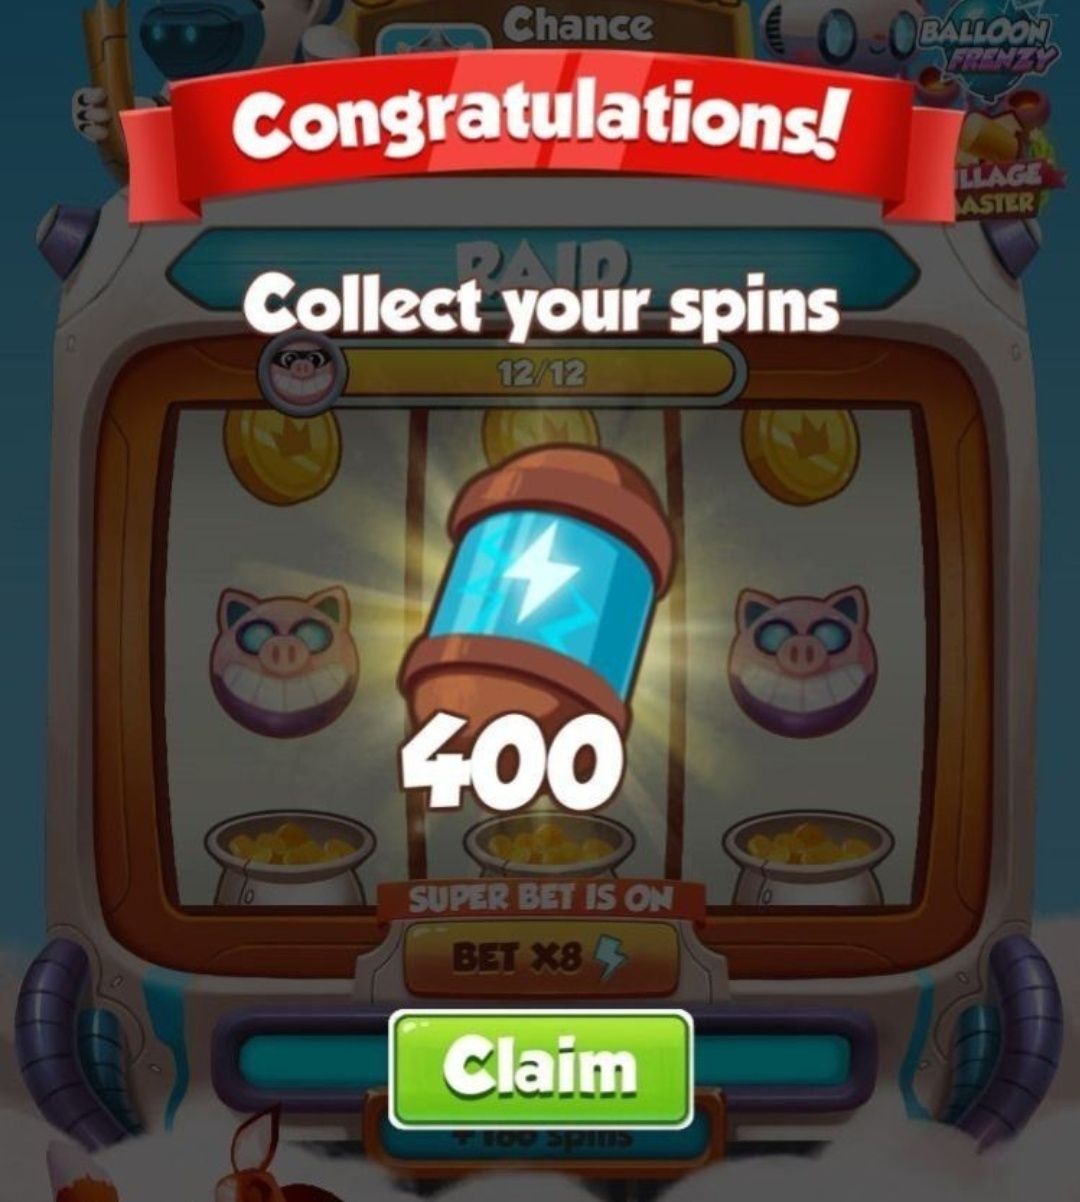 Google coin master free spins